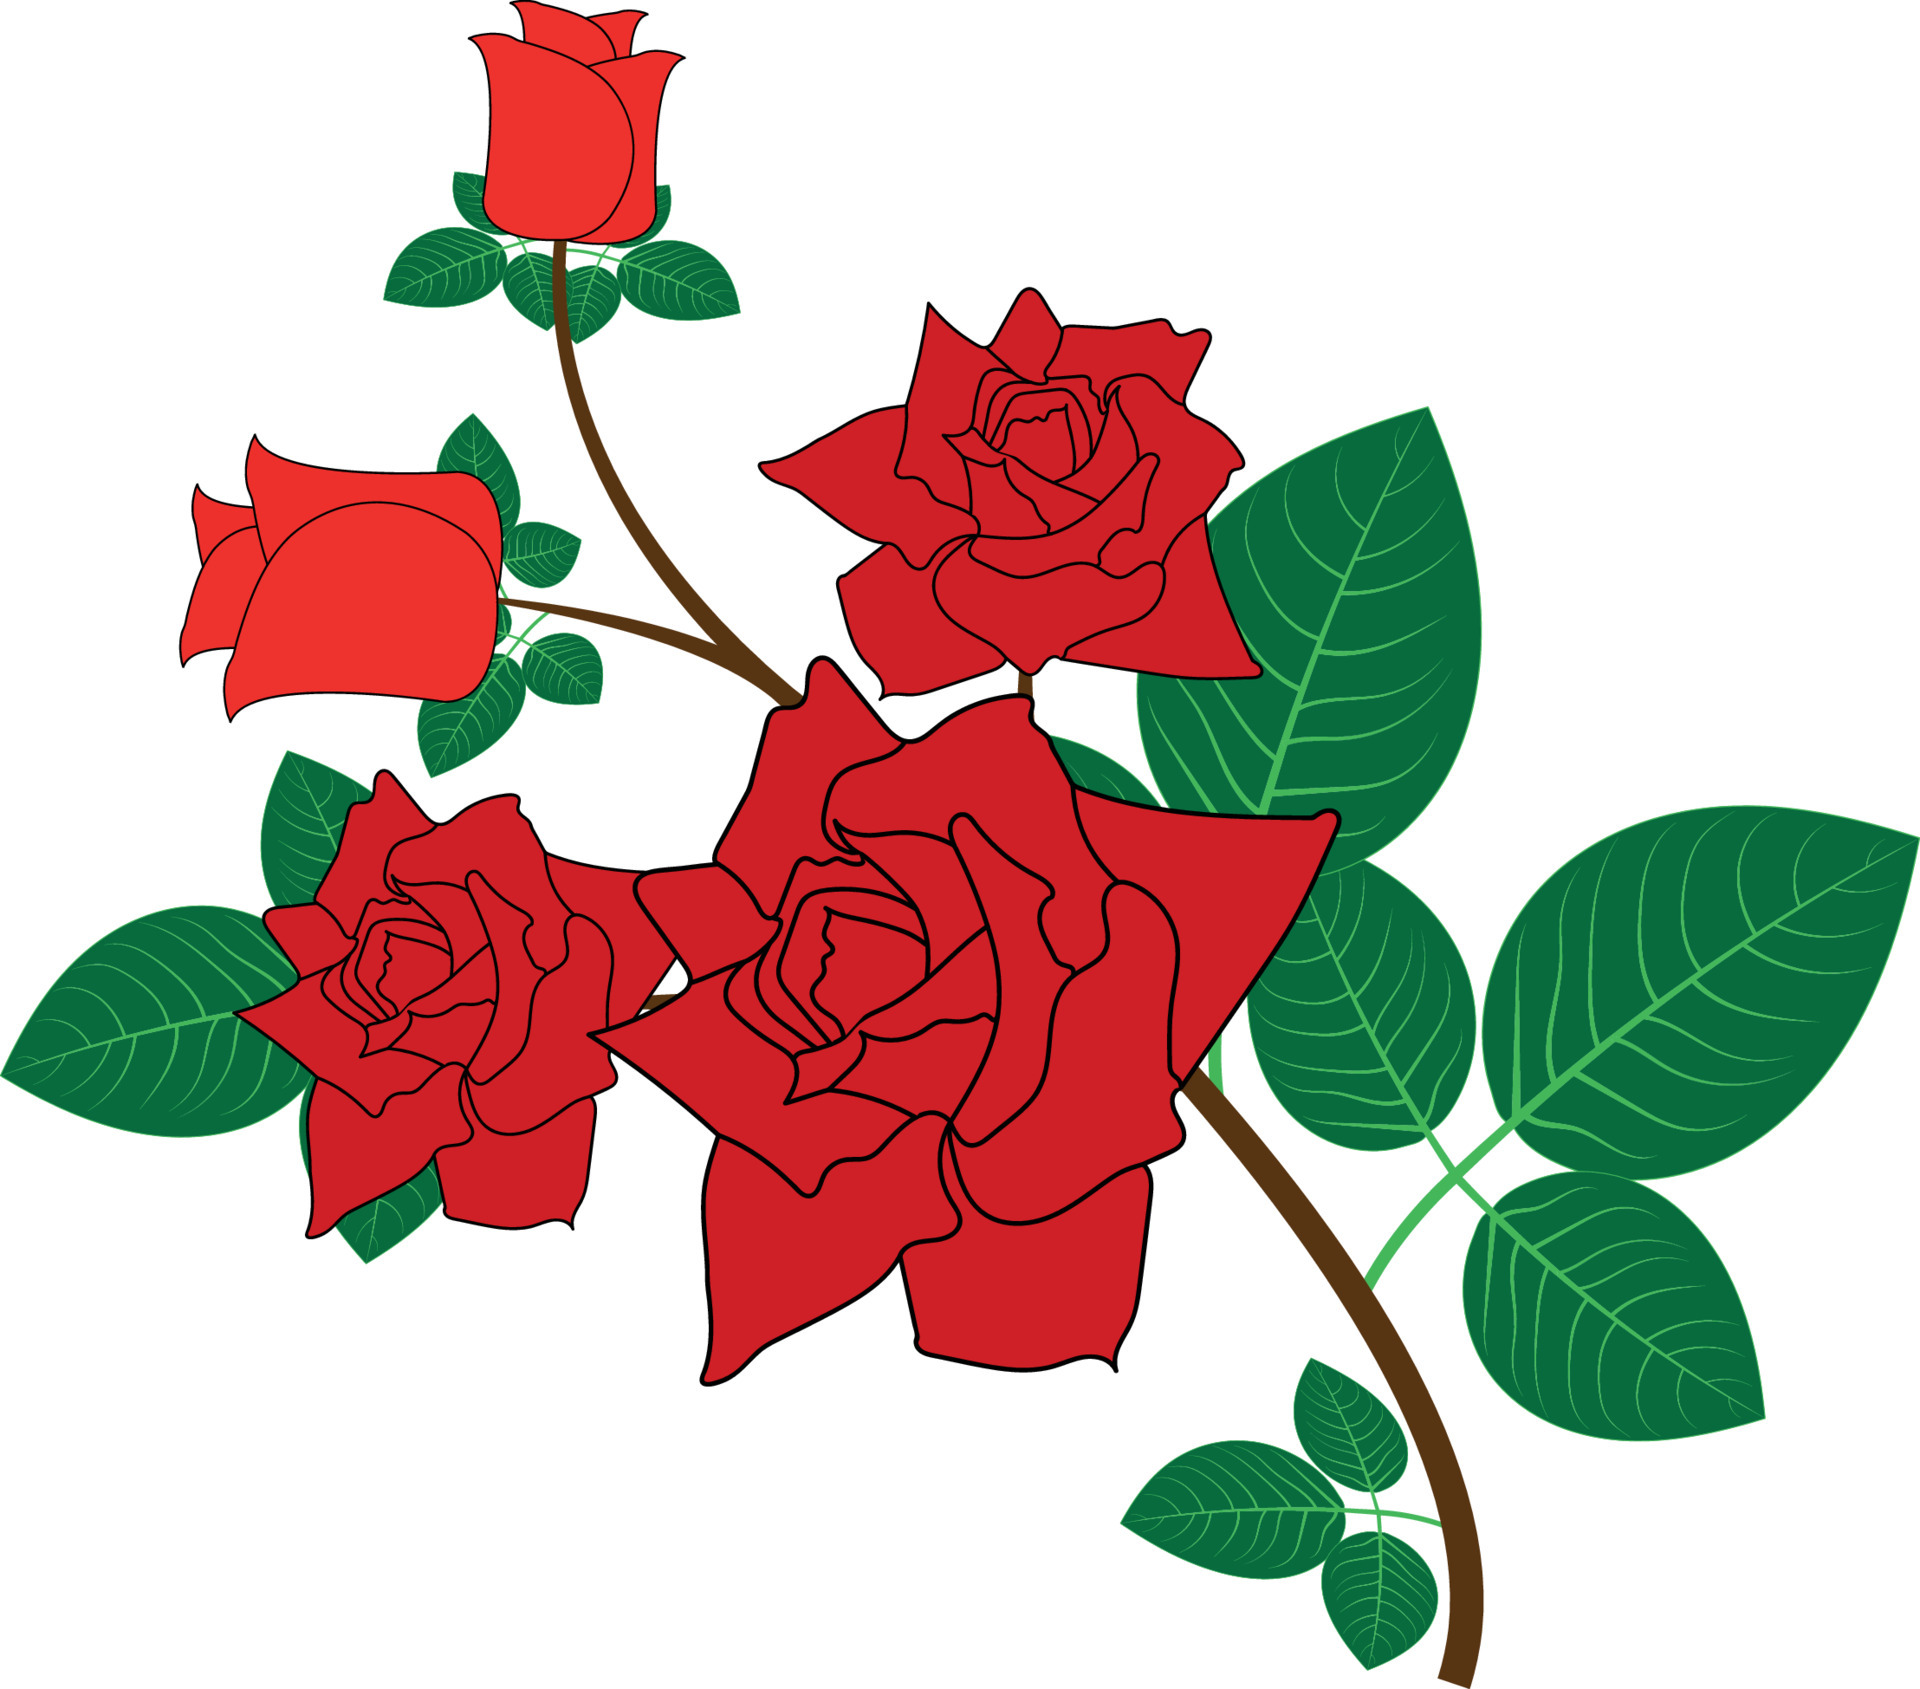 Top 25 Simple Yet Beautiful Rose Tattoo Designs  Styles At Life